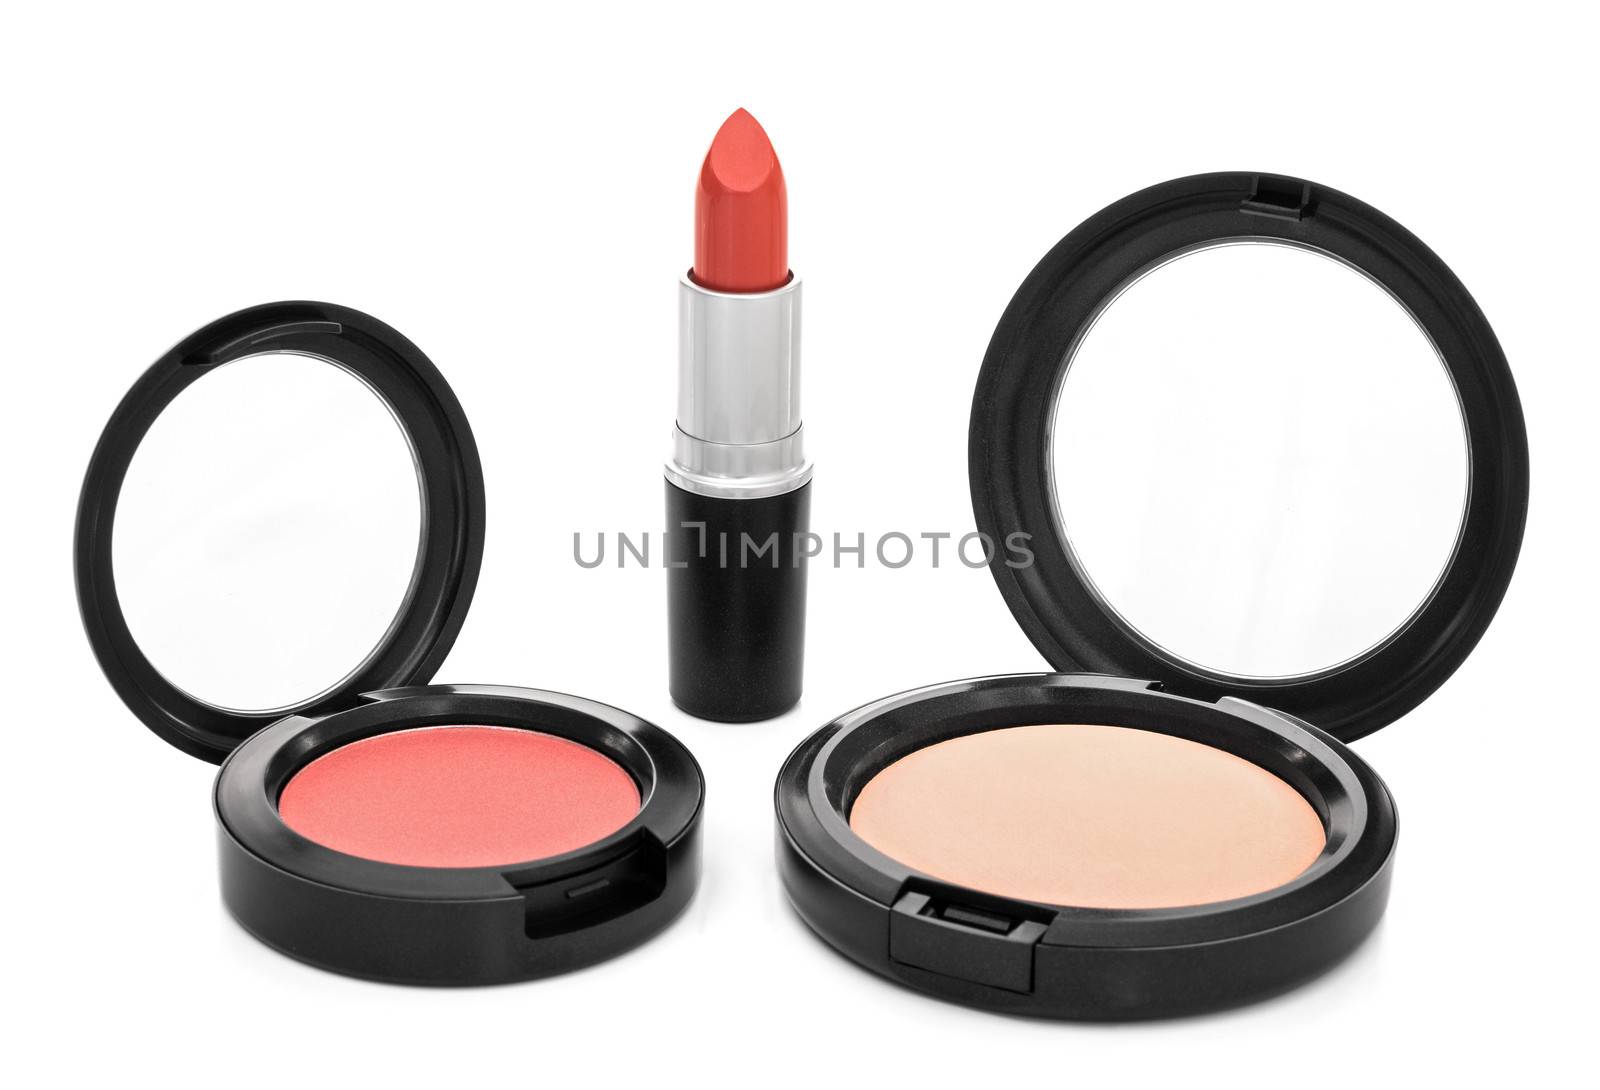 Makeup. Lipstick, blush and face powder, isolated on white background.